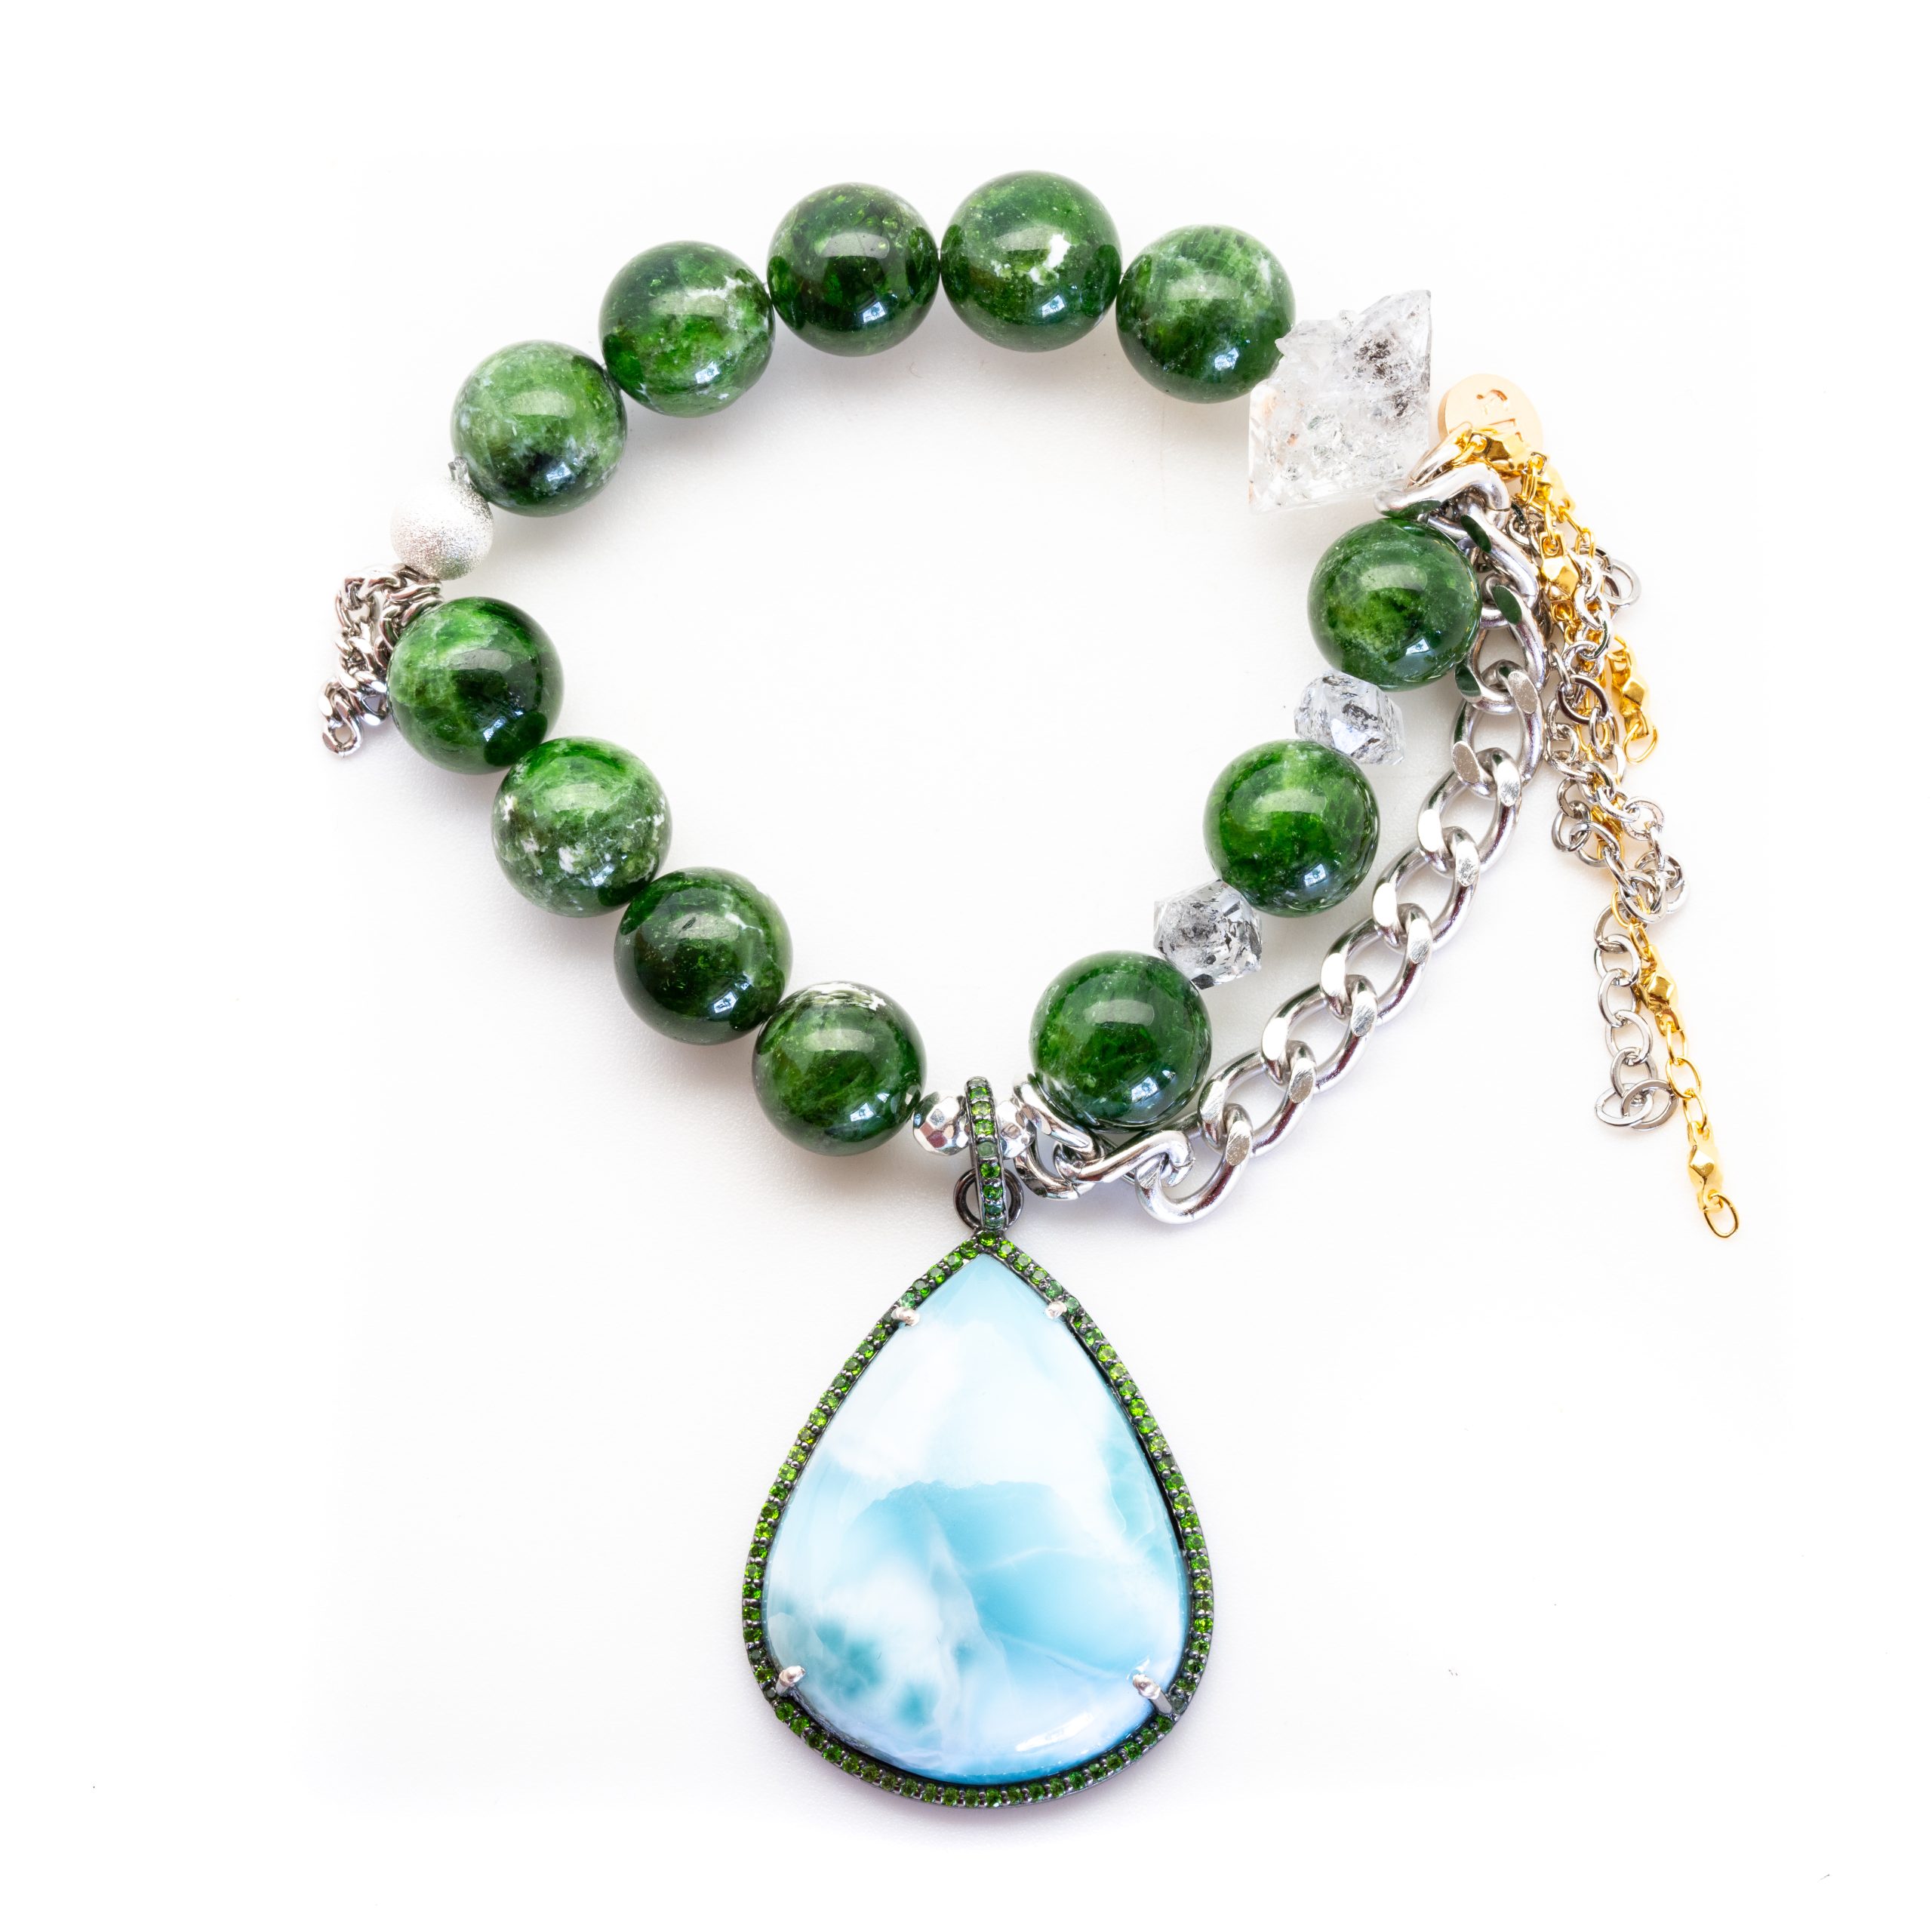 Diopside with a Green Sapphire Encrusted Larimar Pendant